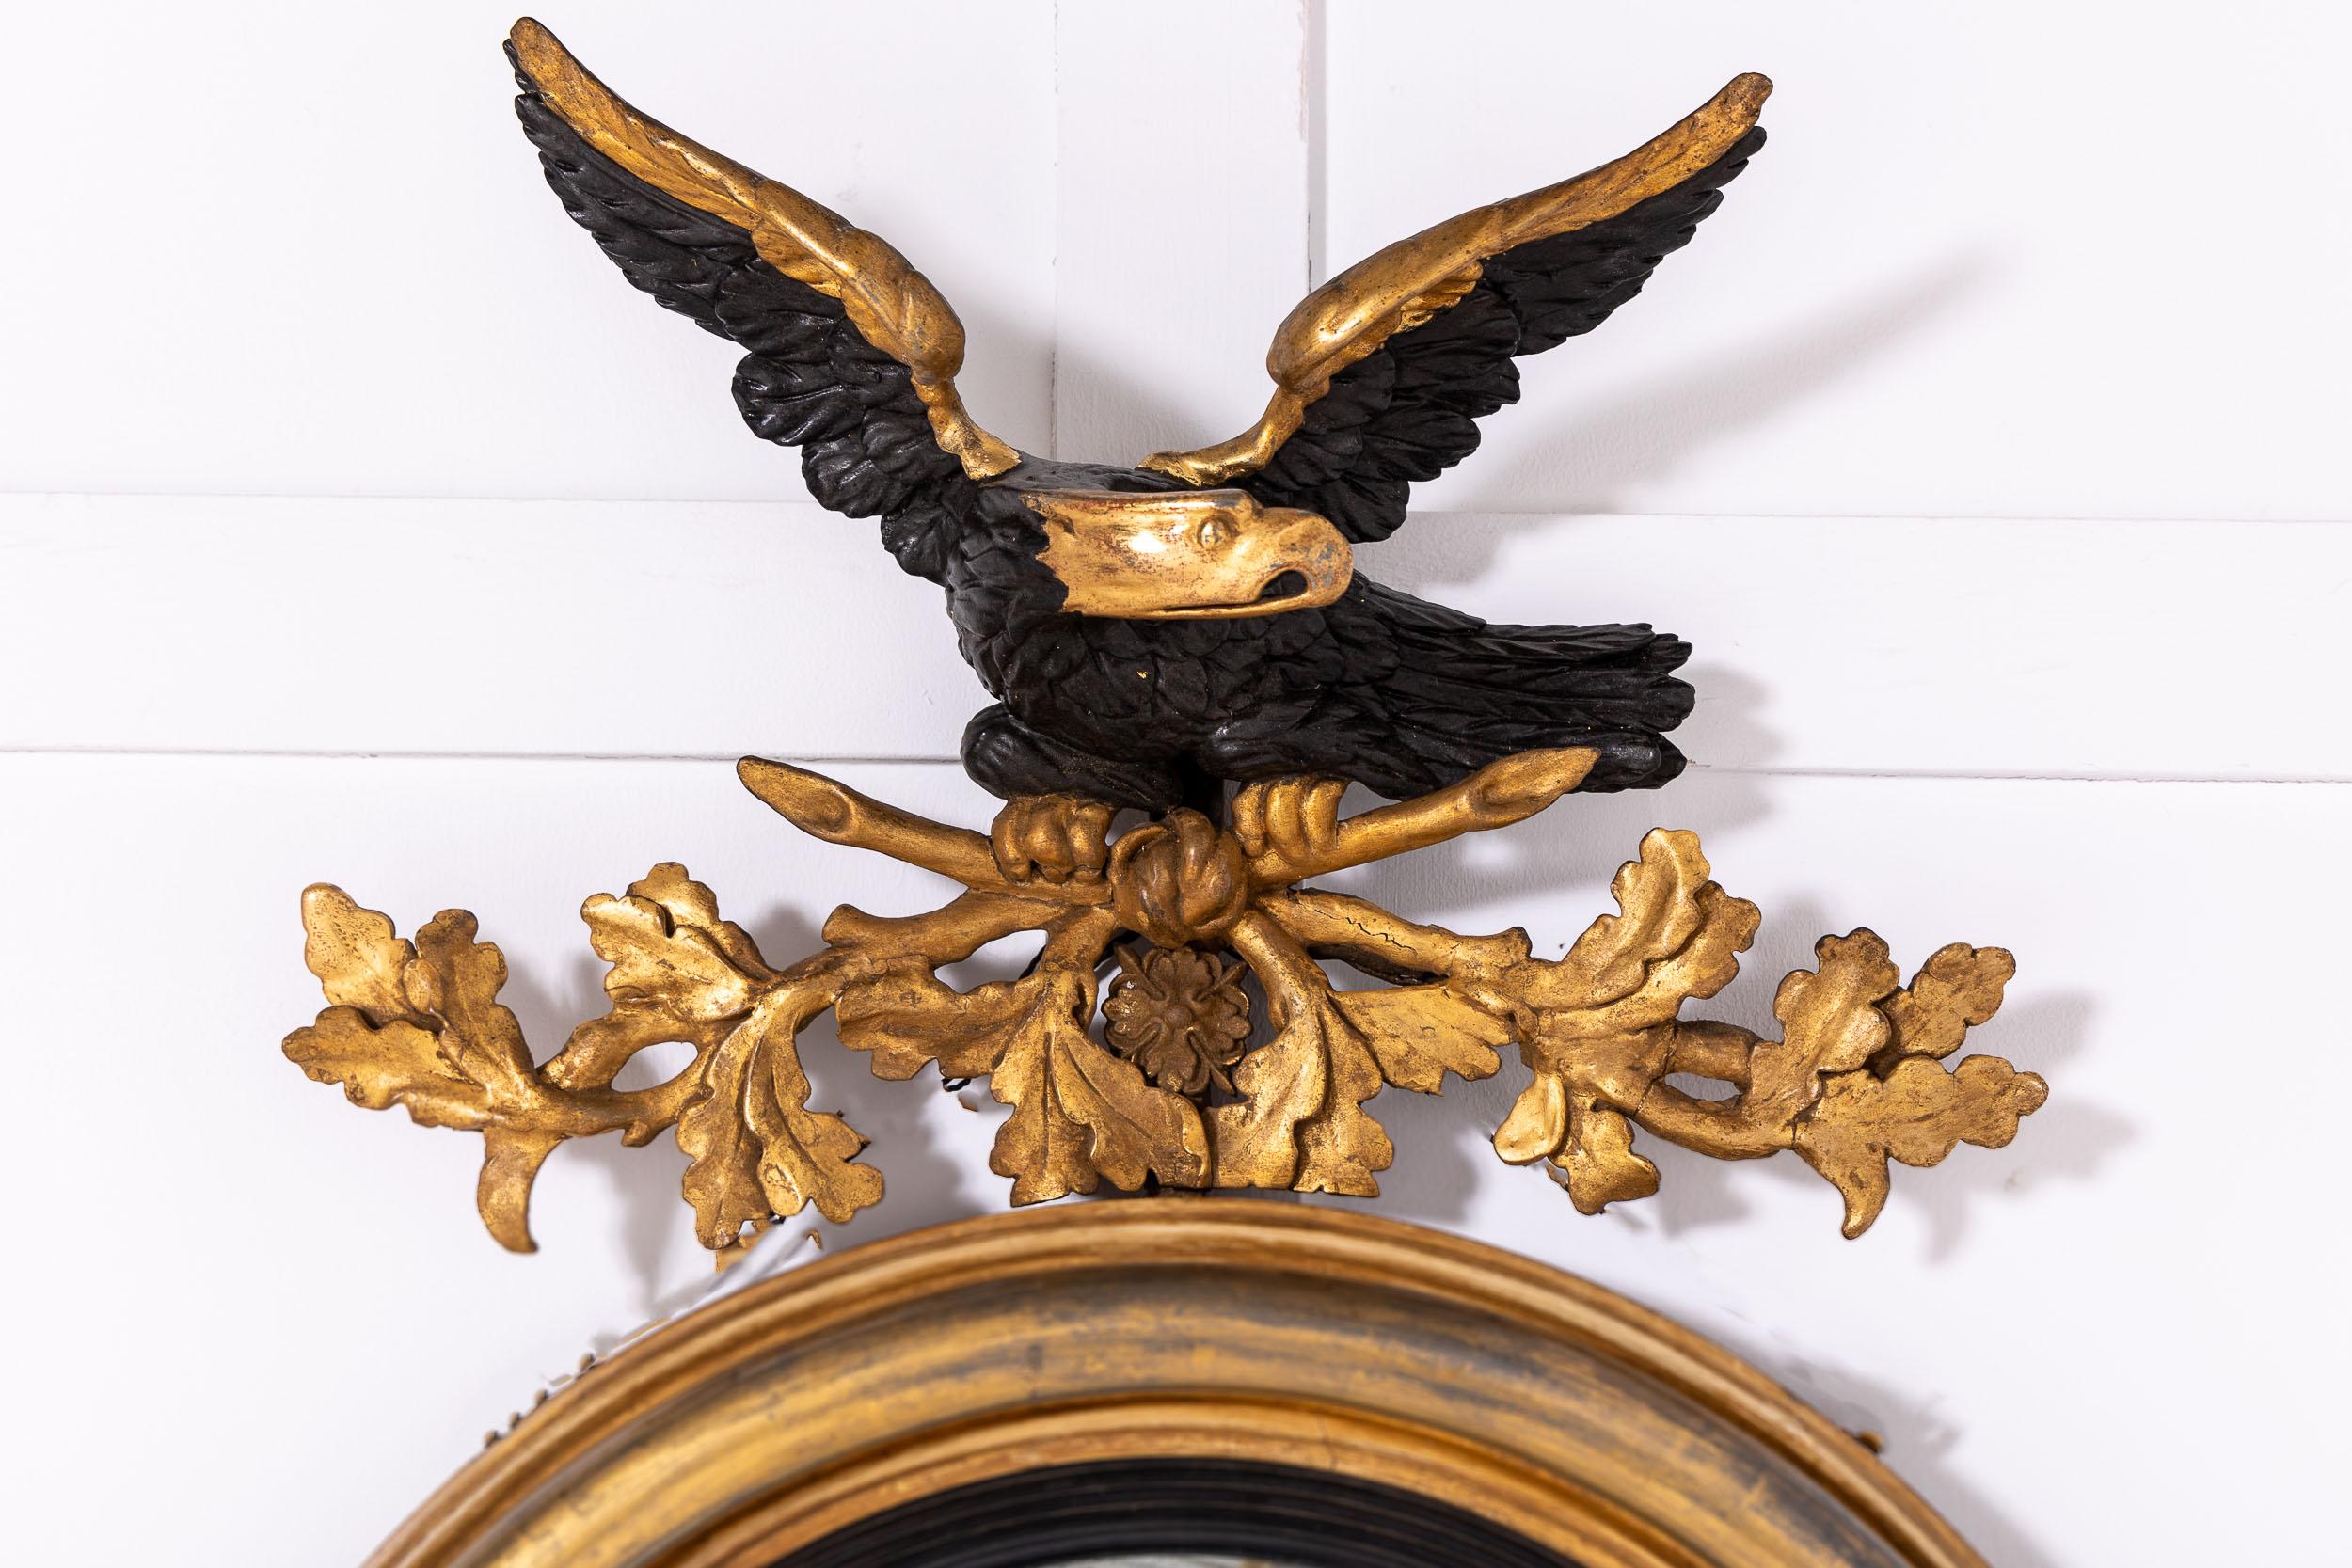 An Excellent and Unusual Regency Period Convex Mirror With Hunting Horn and Wheat Sheaf Motifs.

A fine regency period convex mirror with eagle cresting, unusually rendered in black and gold rather than simply one or the other. The eagle sits atop